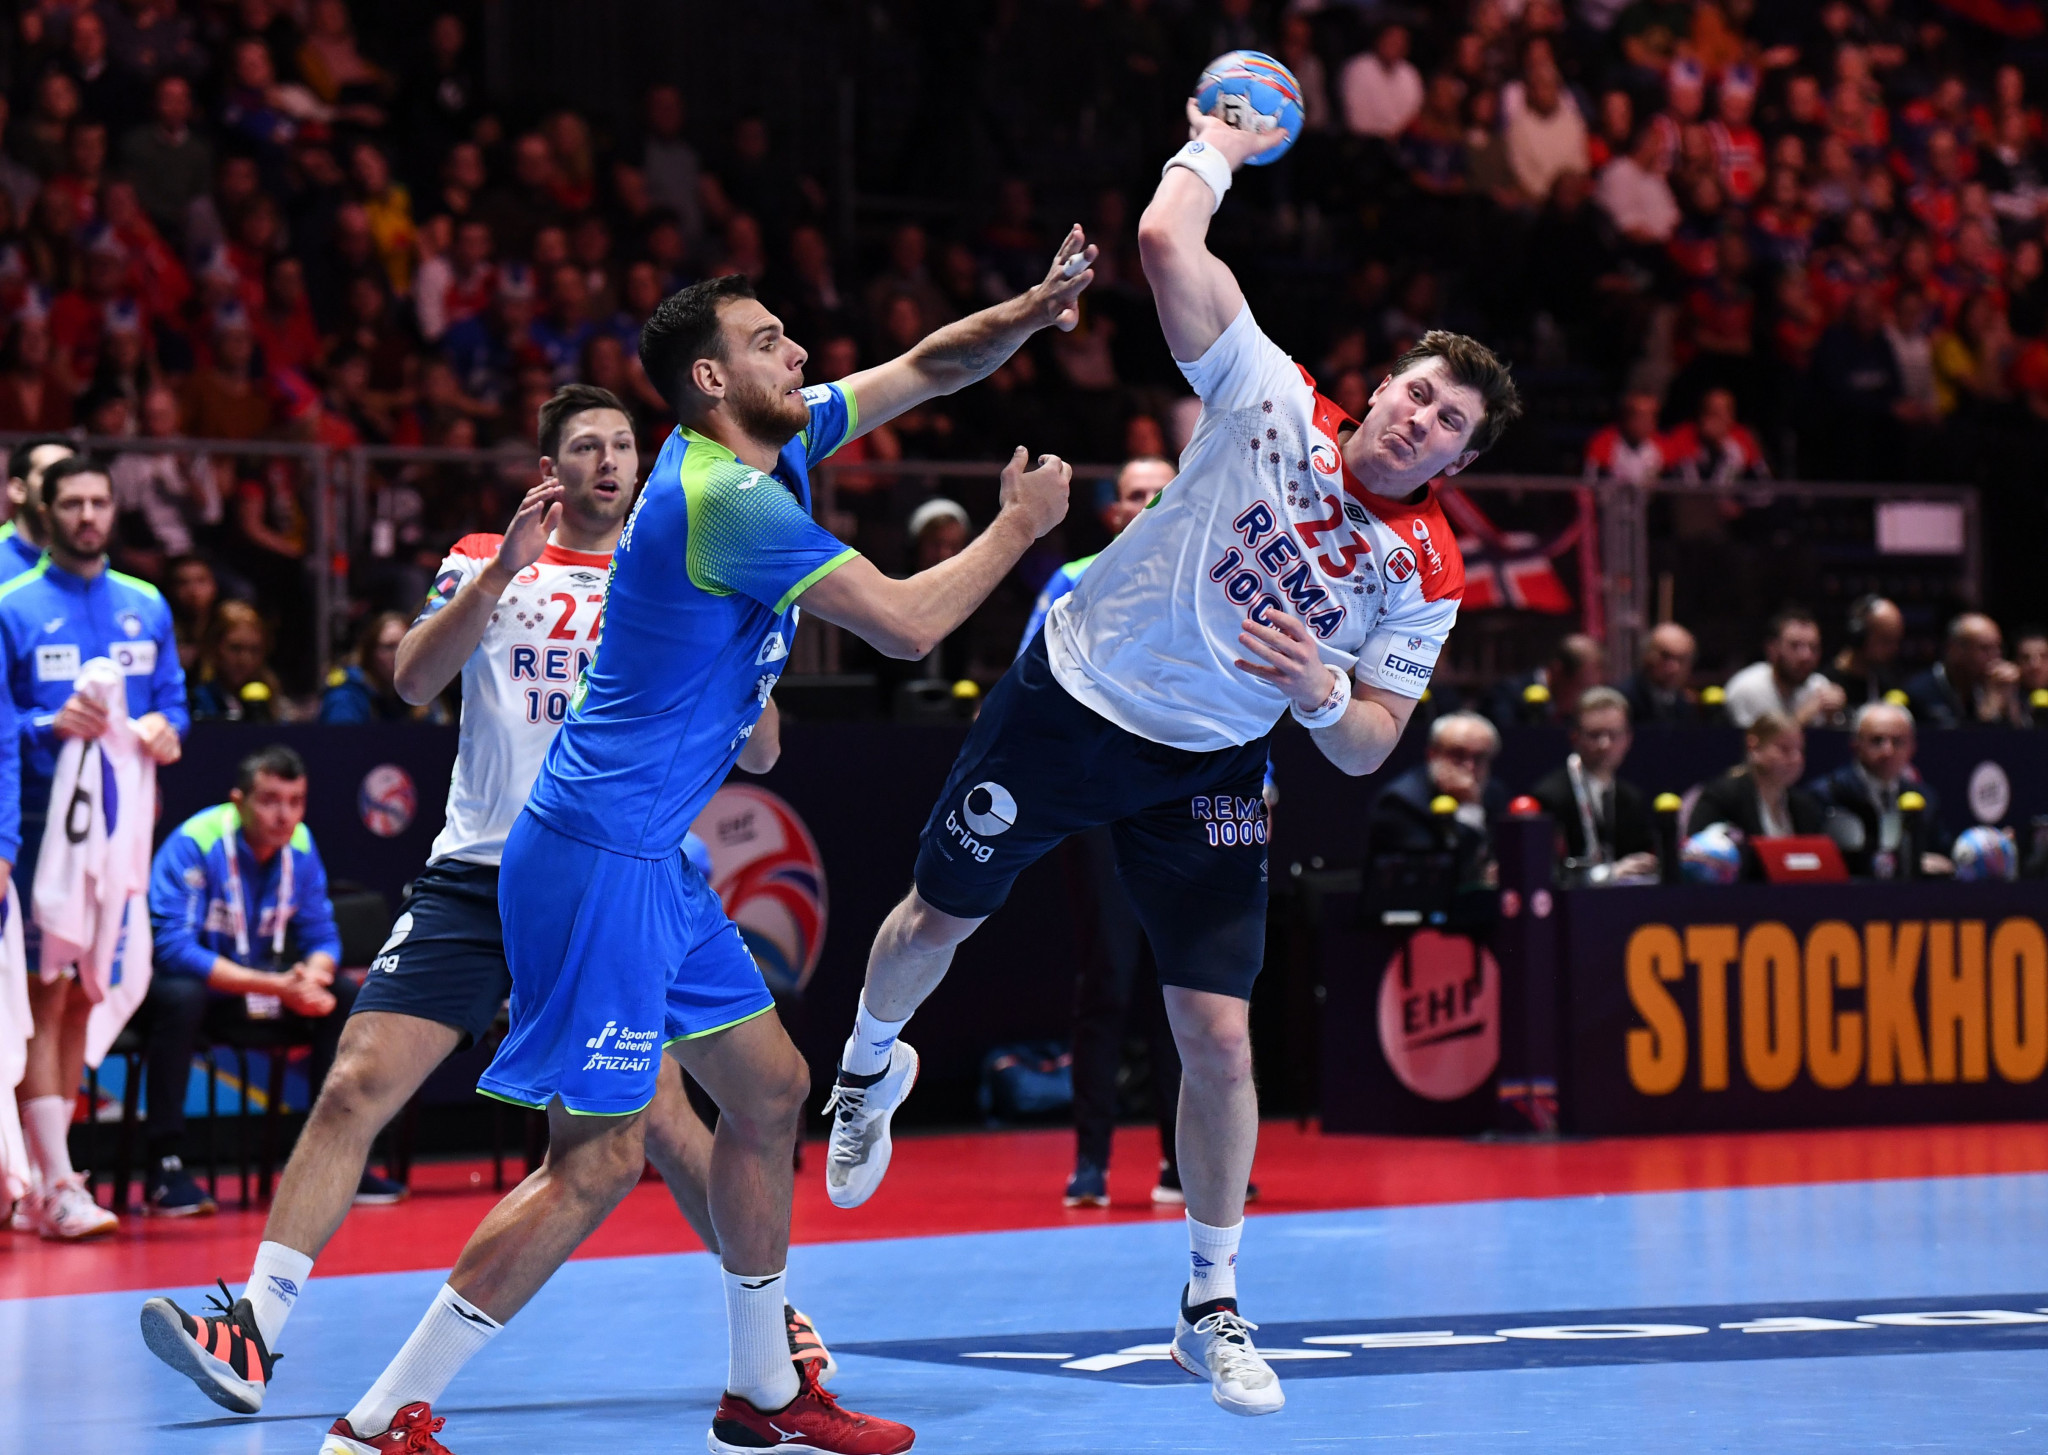 The European Handball Federation completed the draw for the 2022 European Men's Handball Championship qualifiers ©Getty Images